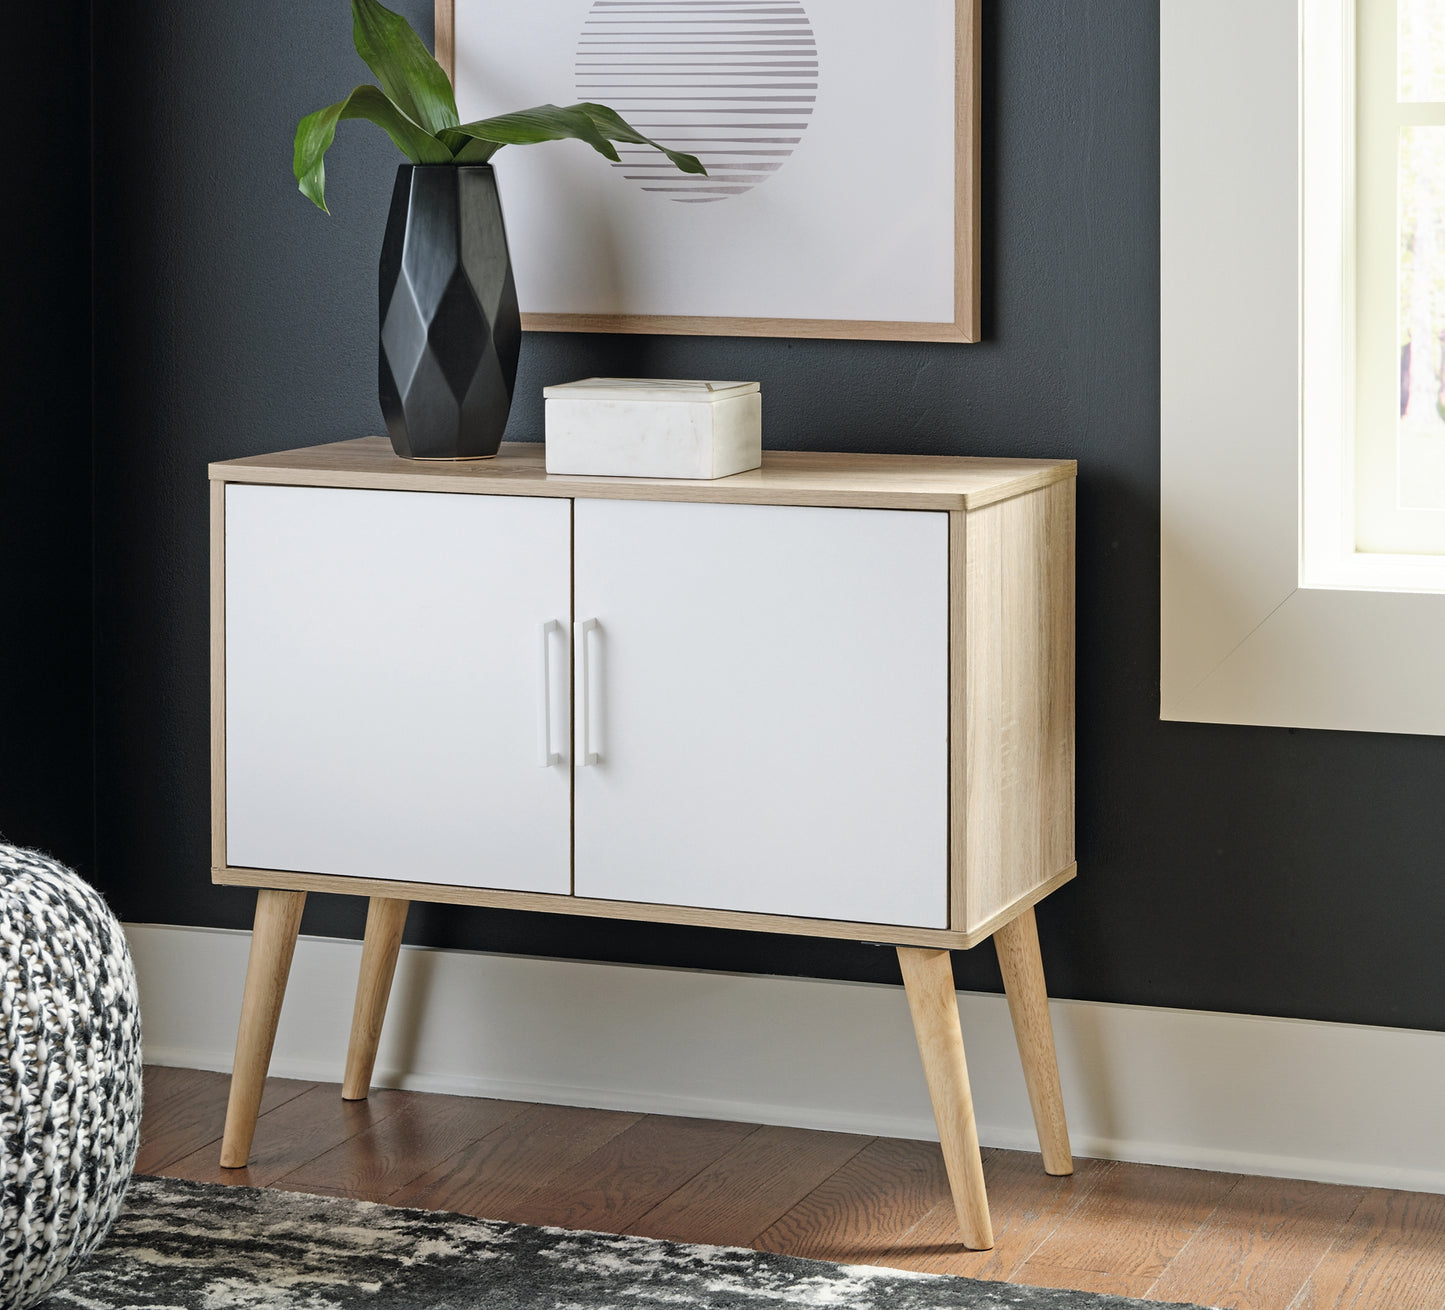 Orinfield Accent Cabinet Signature Design by Ashley®